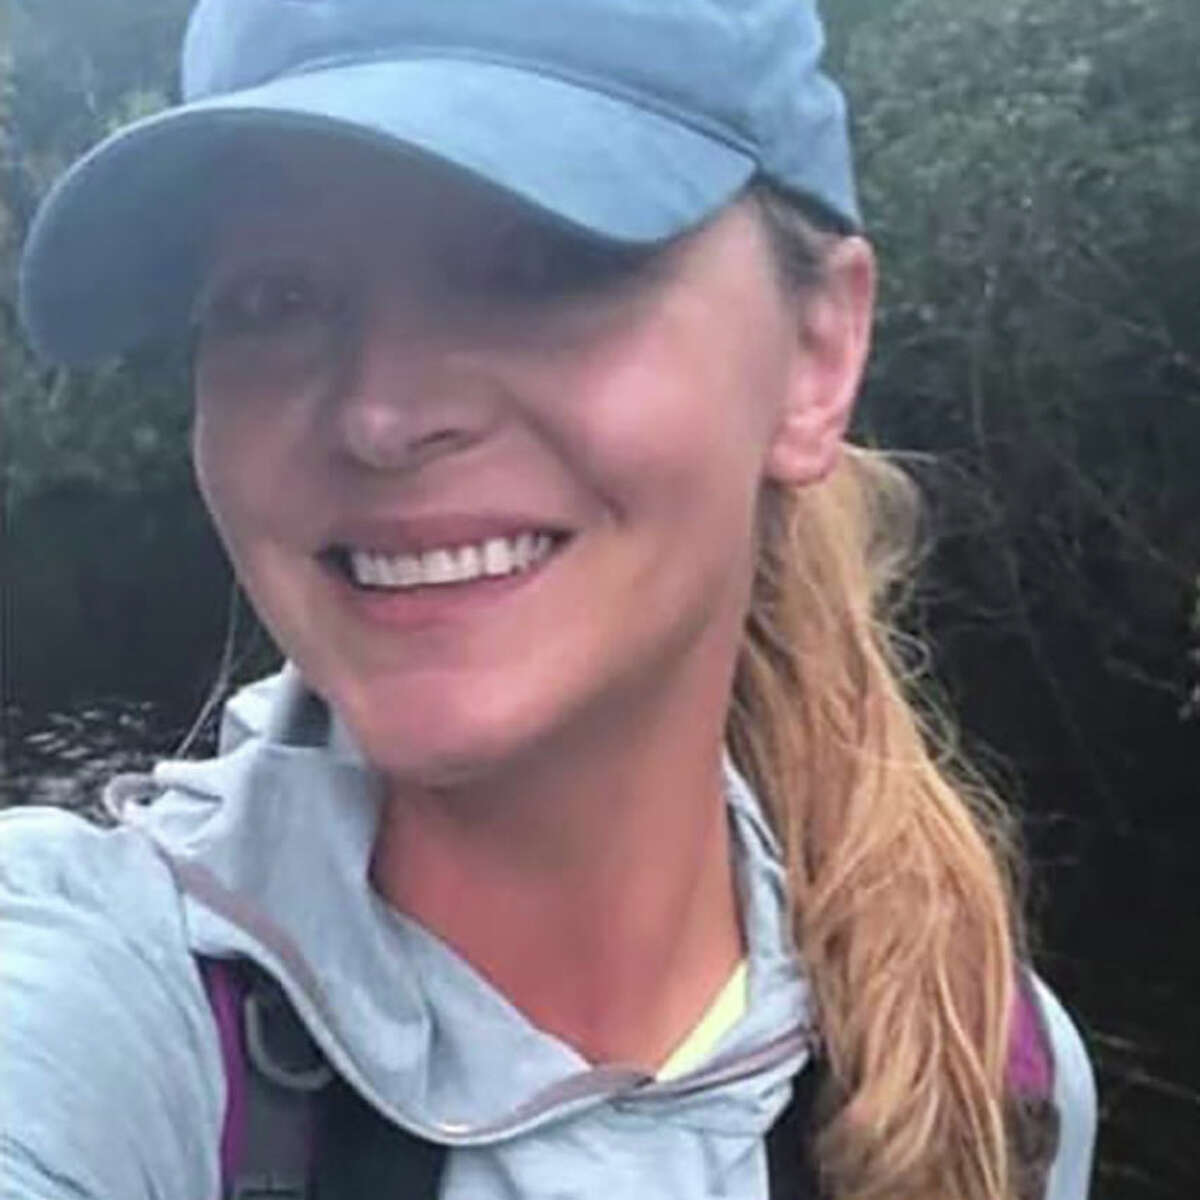 Andrea Huntley's first experience fishing on the Baldwin River turned into an emergency situation as she got lost in the swamp trying to find her way back to her truck.